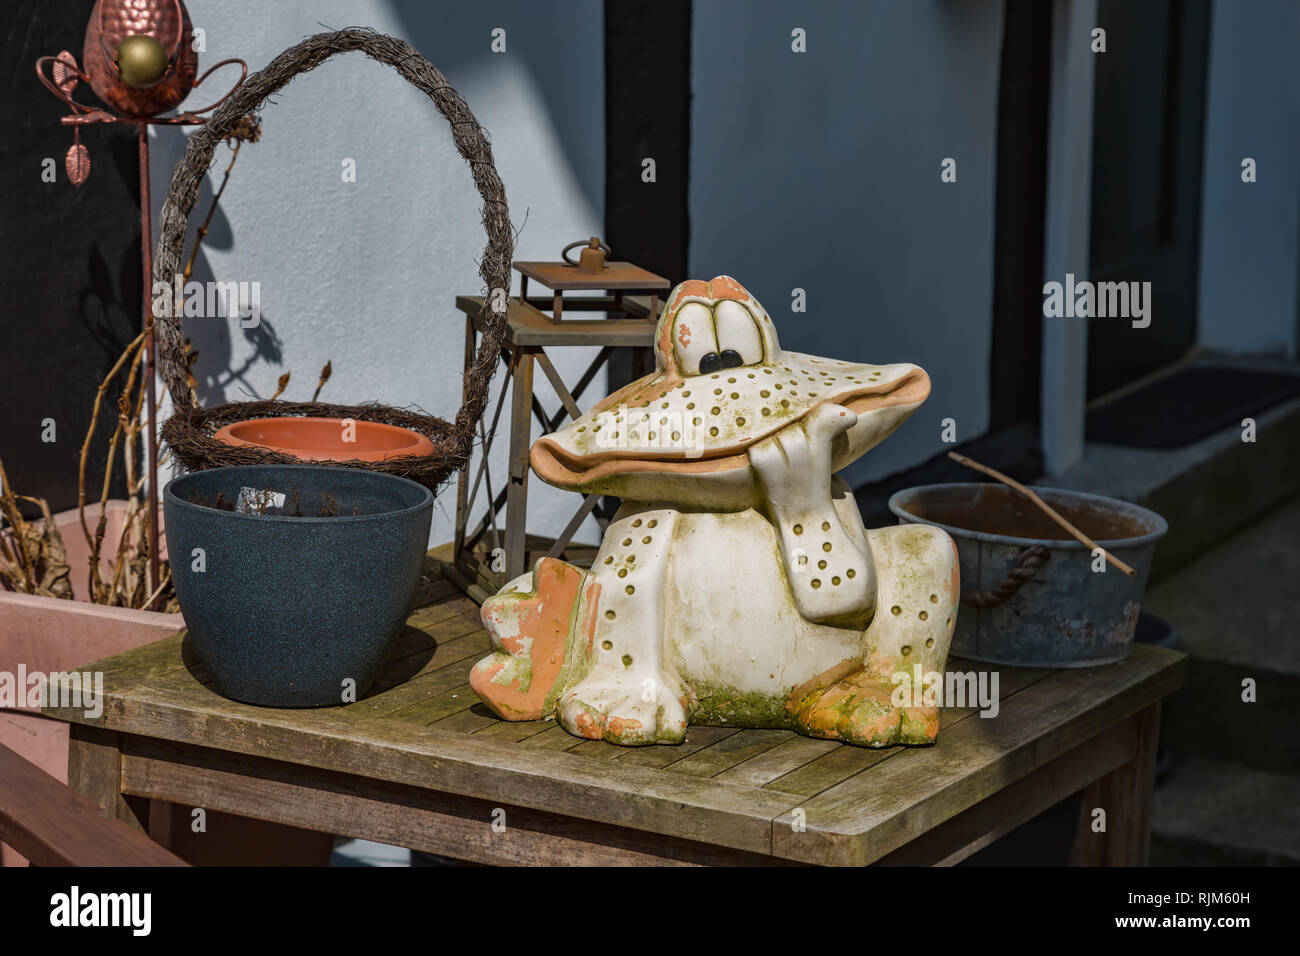 Decoration with a funny frog and old objects Stock Photo